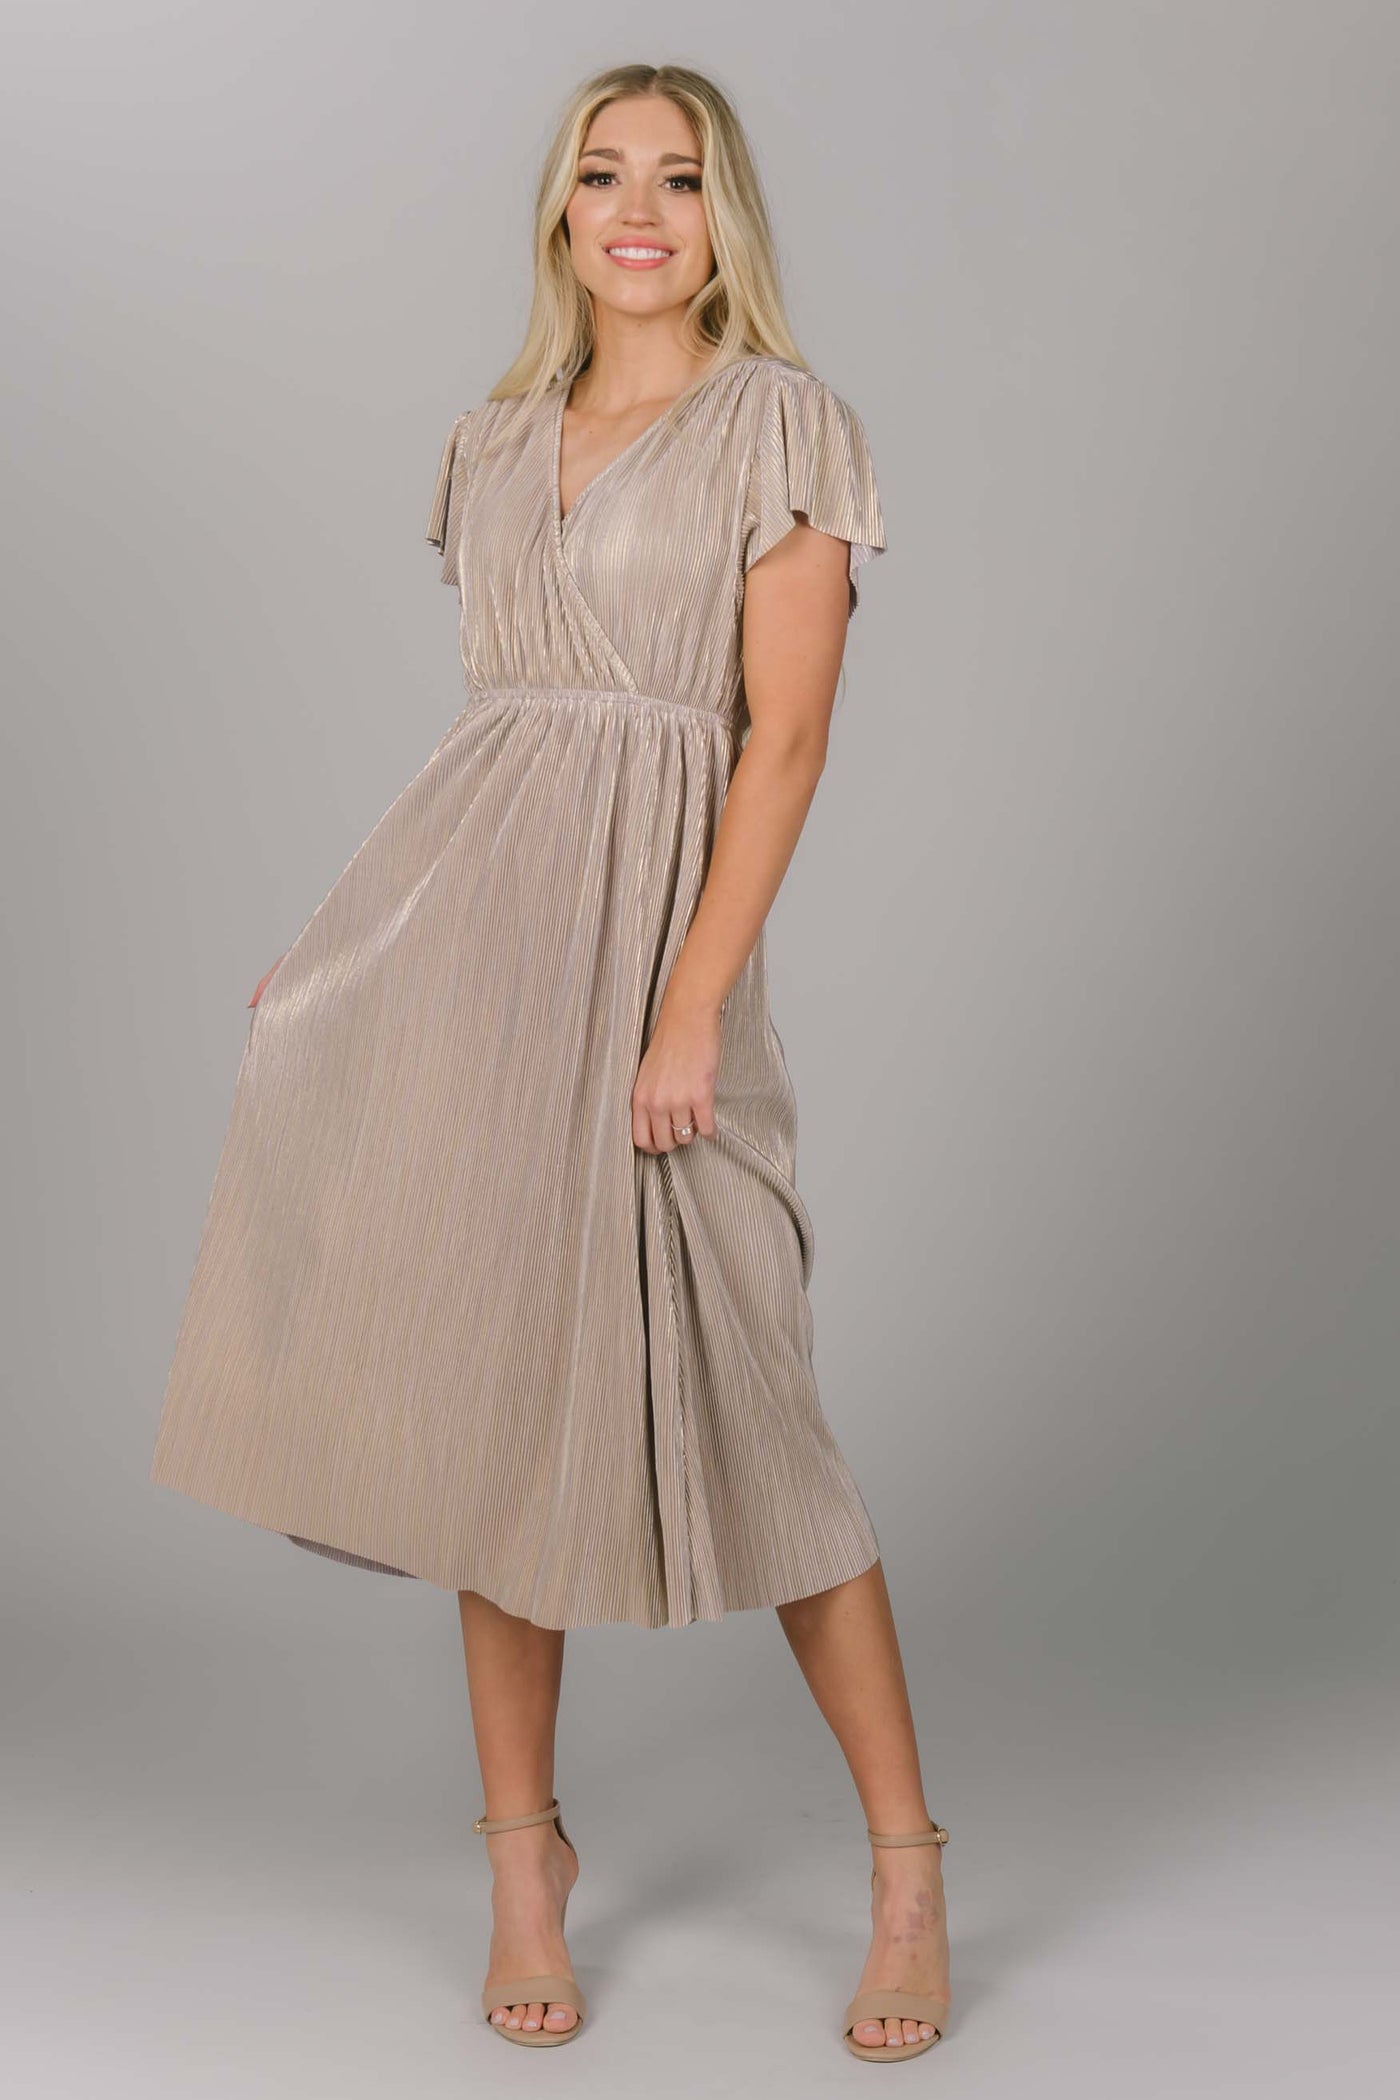 Front view of metallic modest bridesmaid dress. This dress hits mid-calf and is a v-neckline. The sleeves are flutter sleeve style. This grey/gold color makes the perfect bridesmaid dress. 